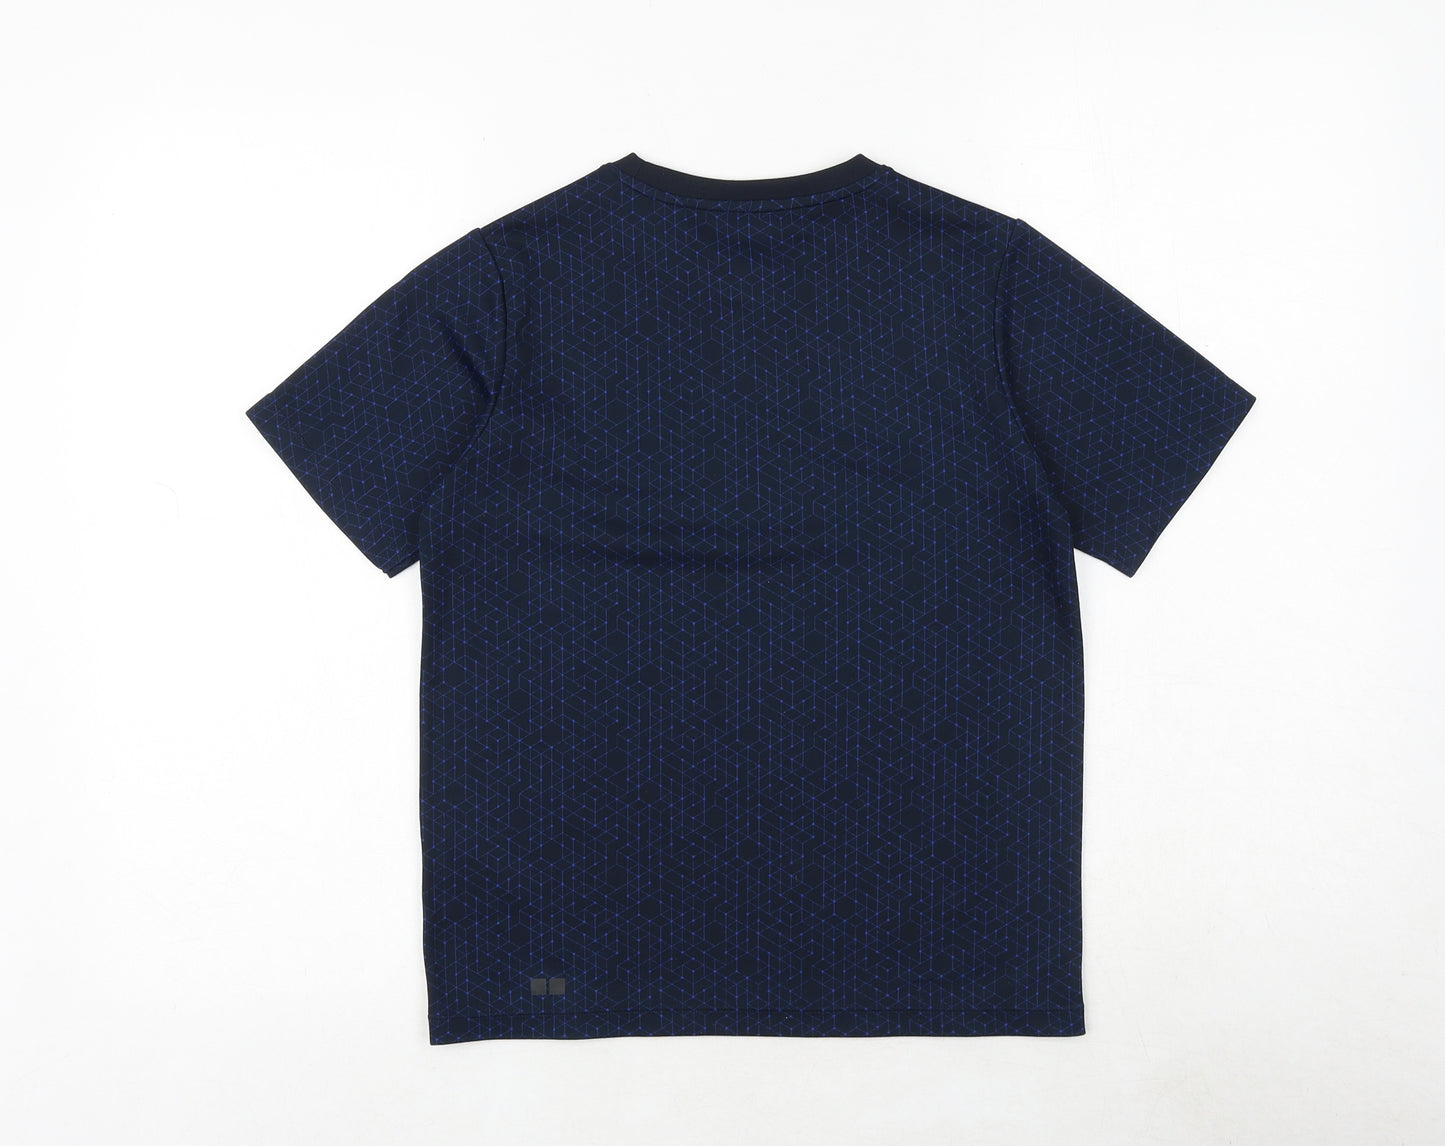 Uniqlo Boys Blue Geometric Polyester Pullover T-Shirt Size 11-12 Years Crew Neck Pullover